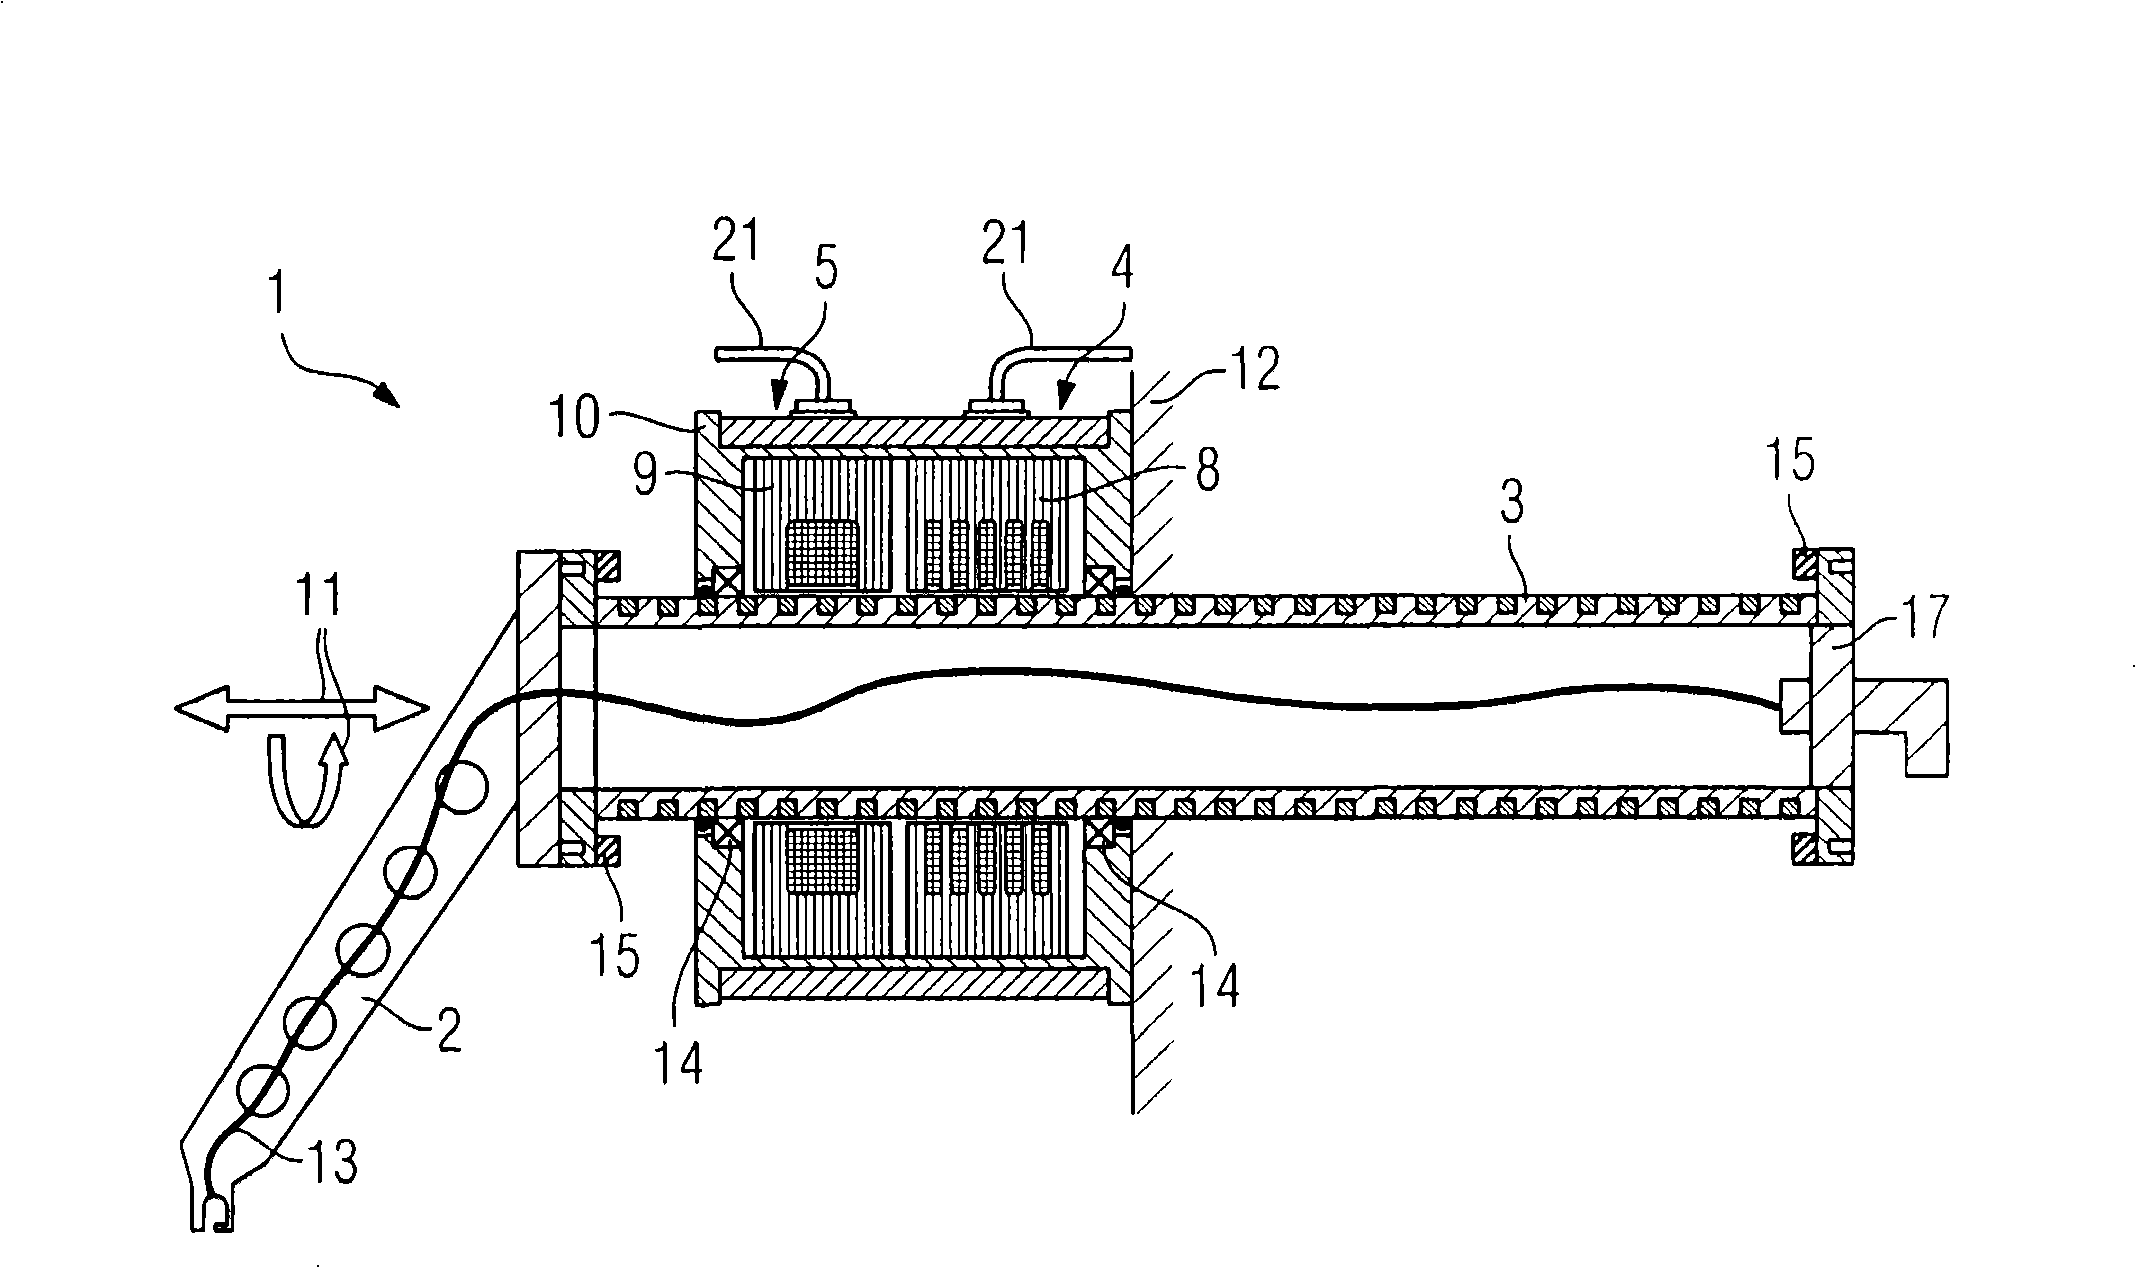 Tool change device with a direct drive reciprocating and pivoting actuator